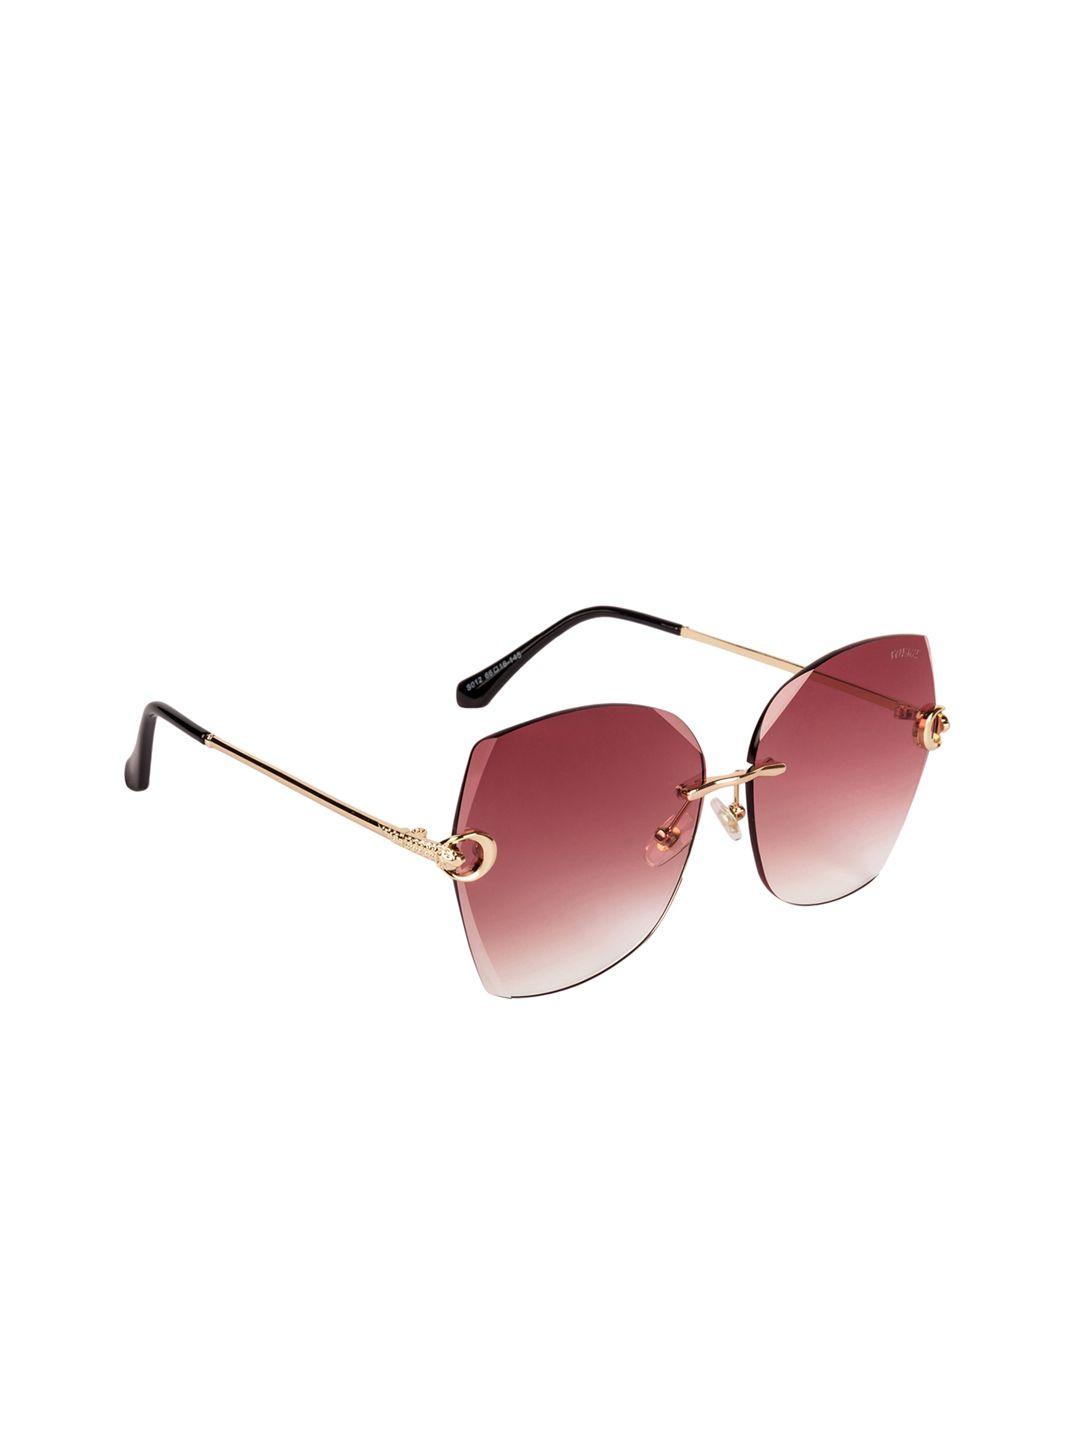 voyage women red square sunglasses s012mg2882